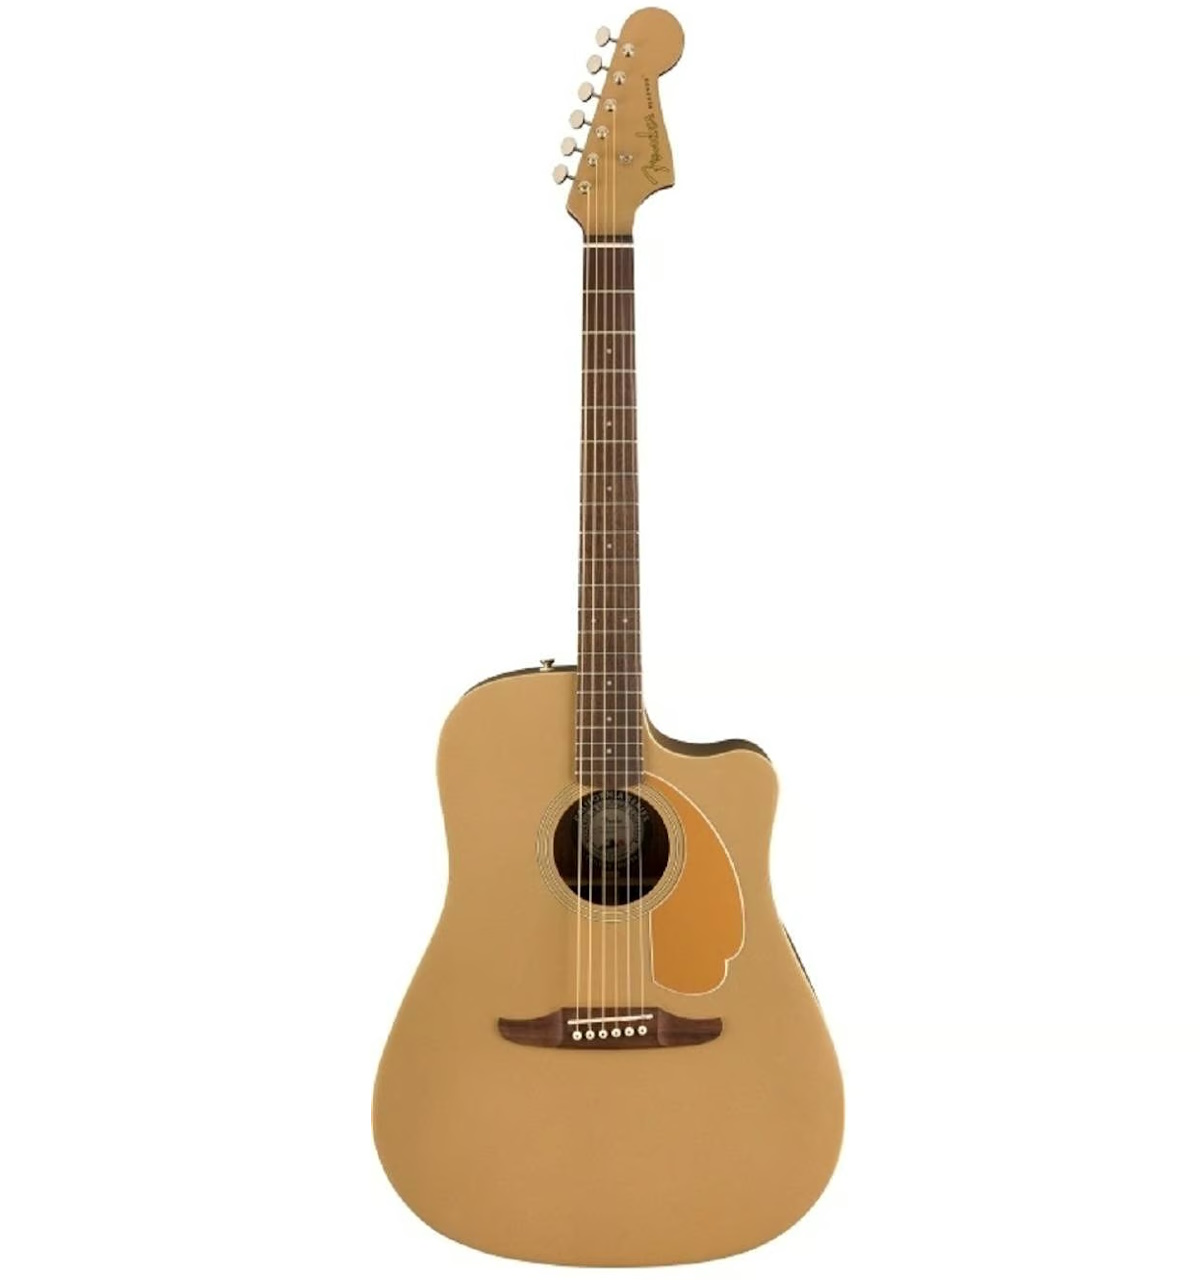 Fender Player Redondo Electric Acoustic Guitar - Bronze Satin - $180 + Free Shipping